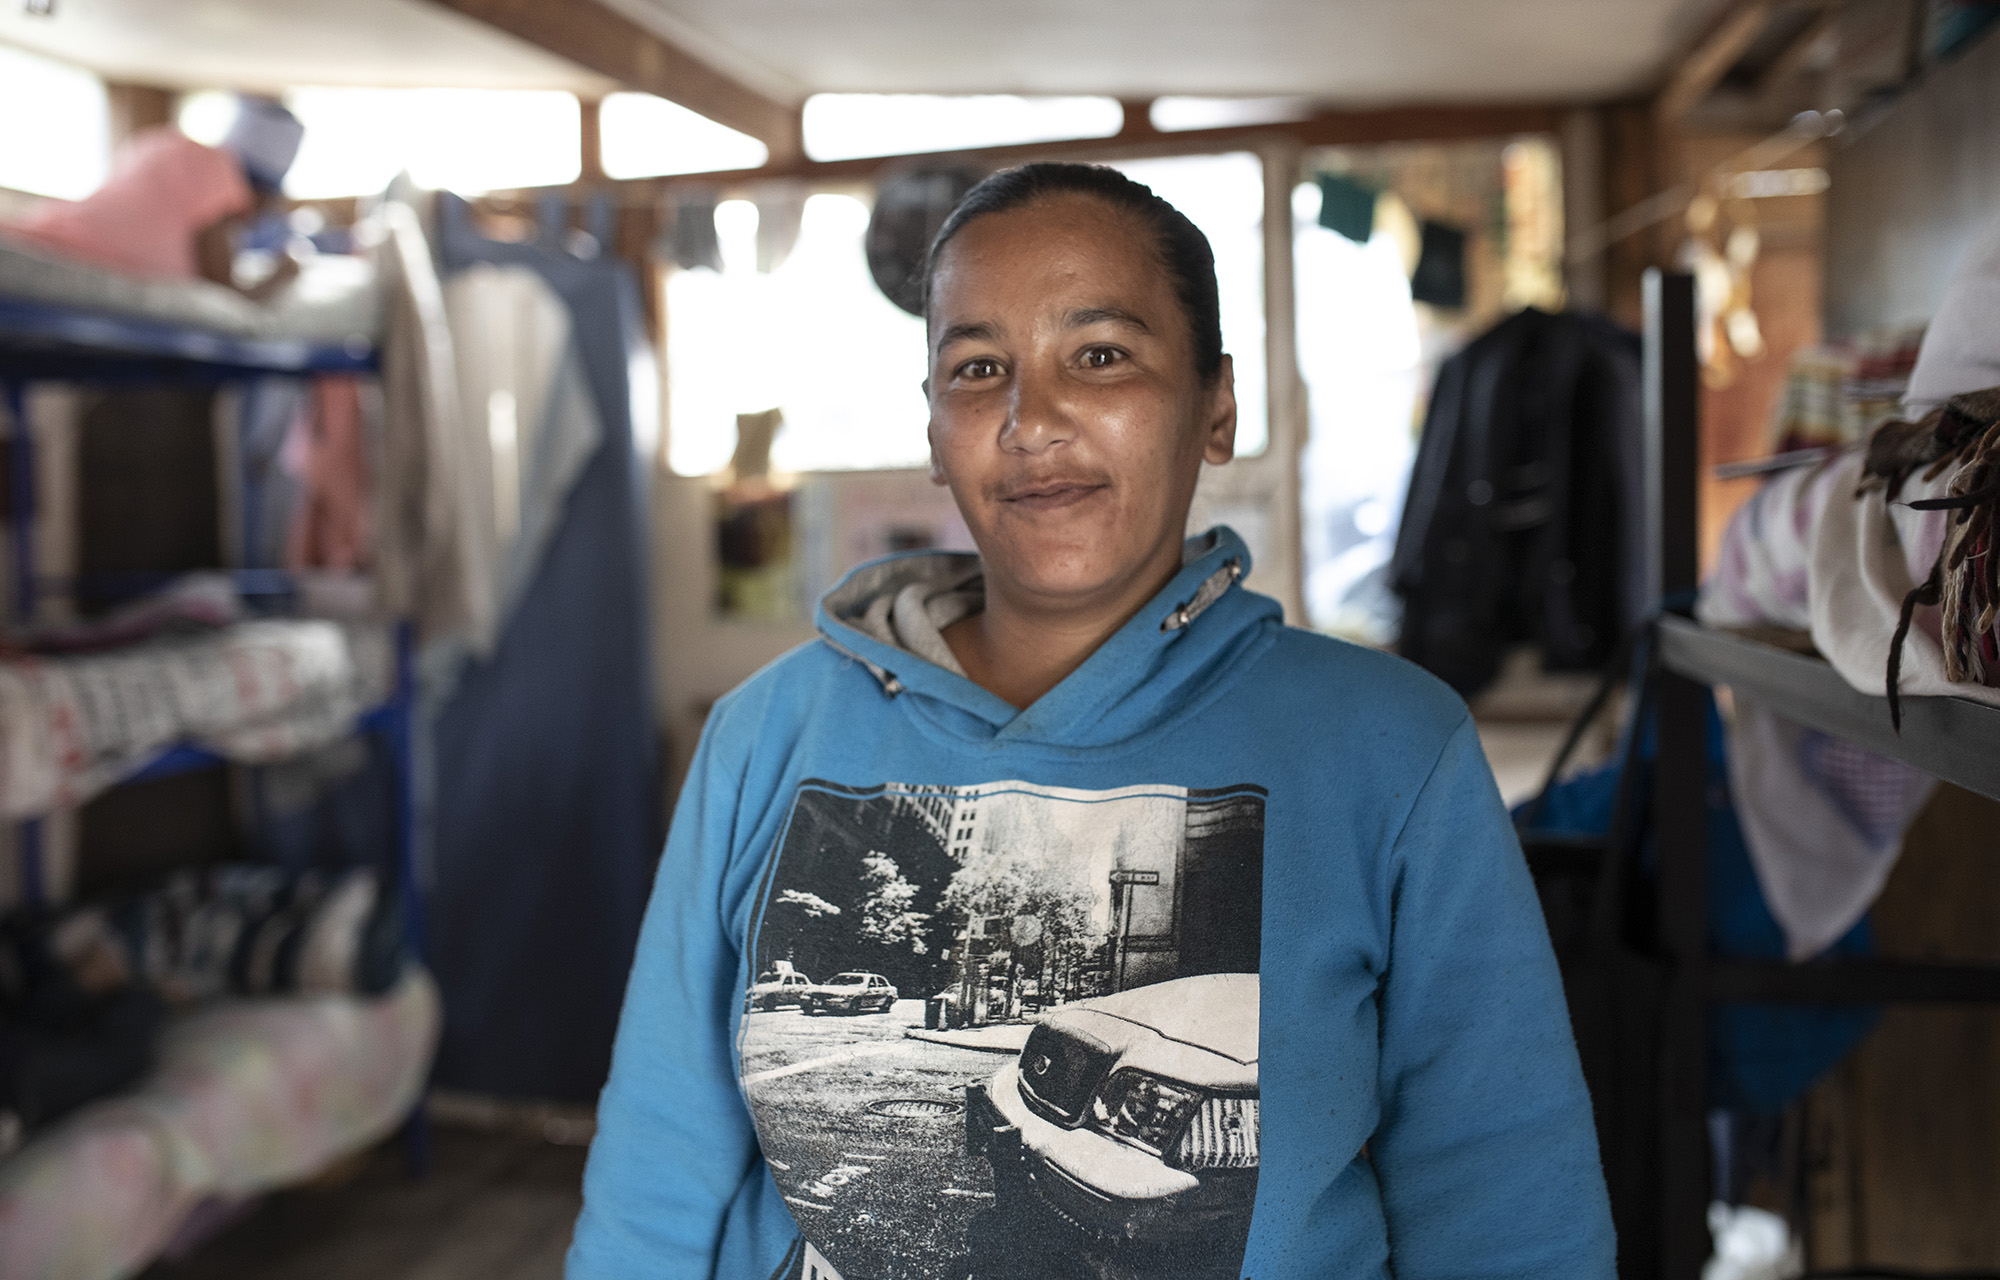 Lezanne Drayer, a resident at the Eleanore Recovery Centre